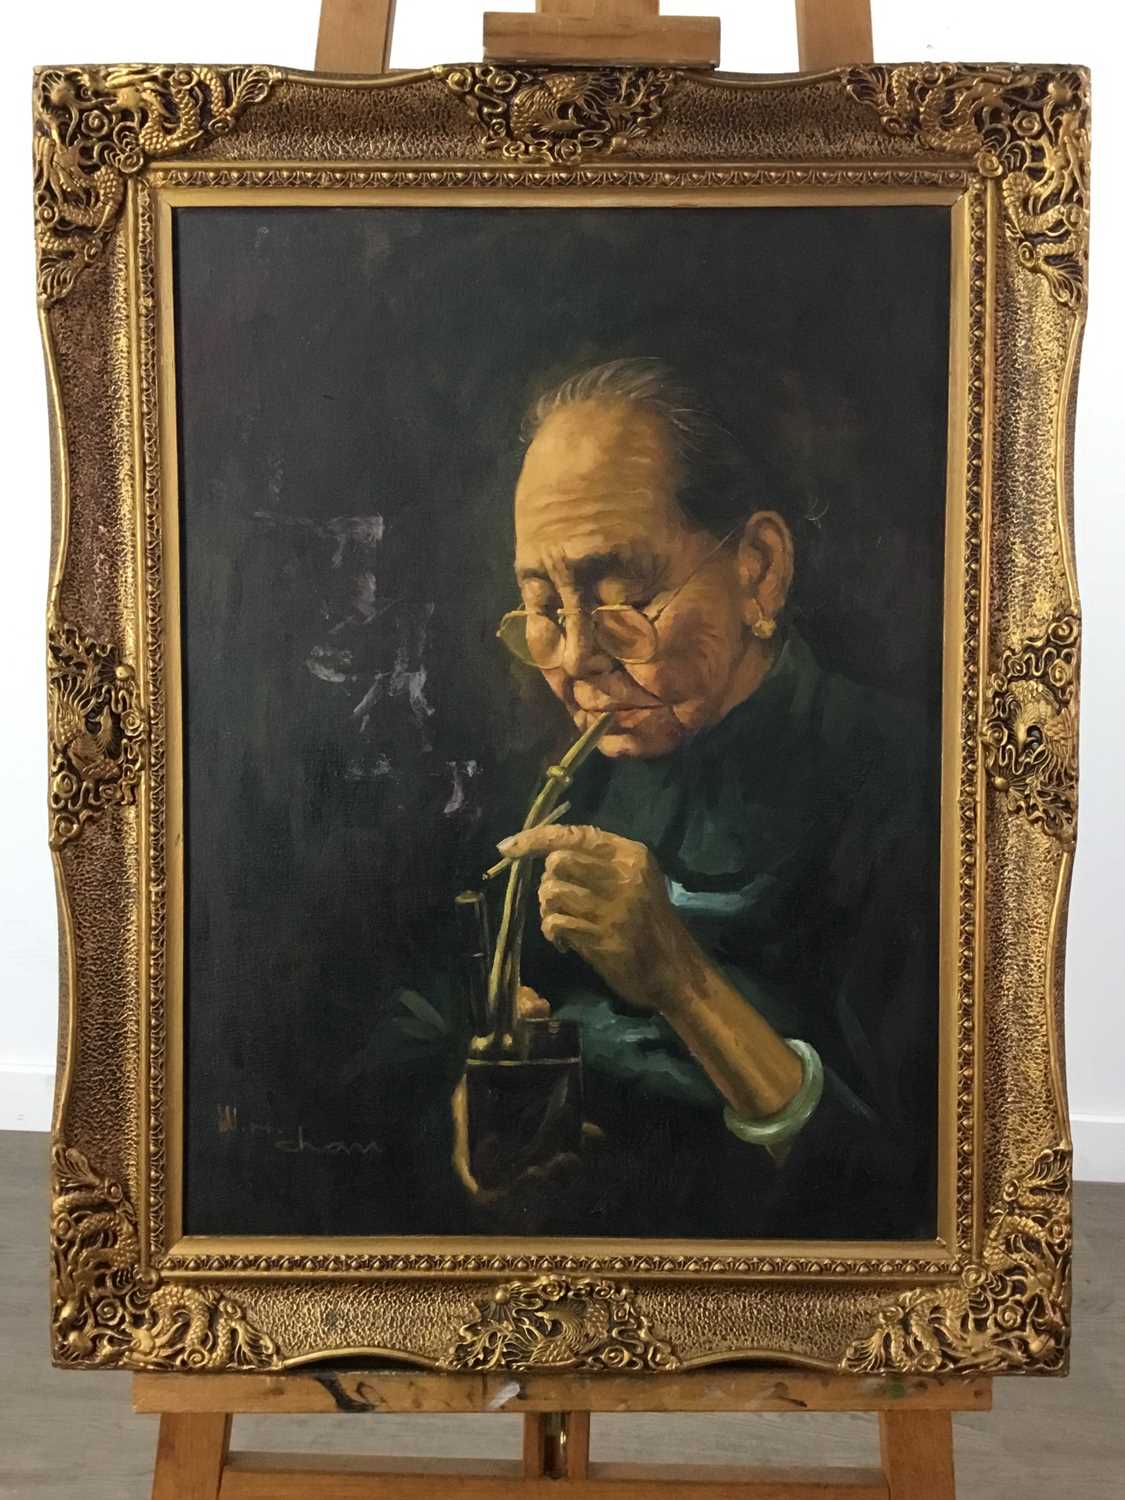 Lot 1175 - AN OIL PAINTING OF A WOMAN SMOKING AN OPIUM PIPE BY W. H. CHAN